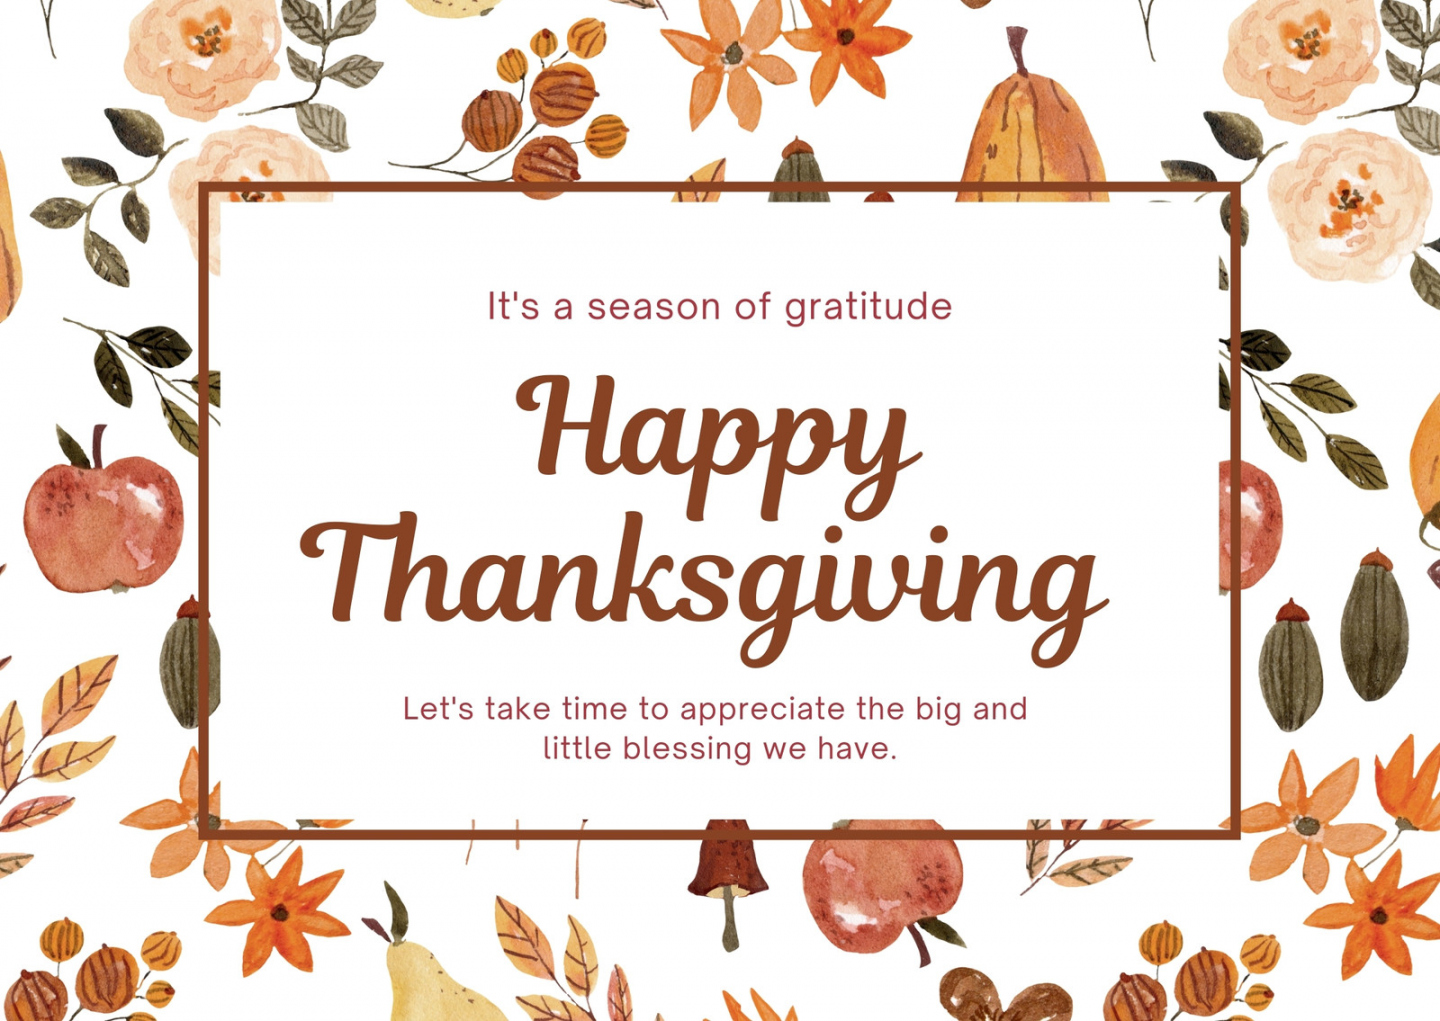 Free printable, customizable Thanksgiving card templates  Canva - FREE Printables - Free Printable Thanksgiving Cards